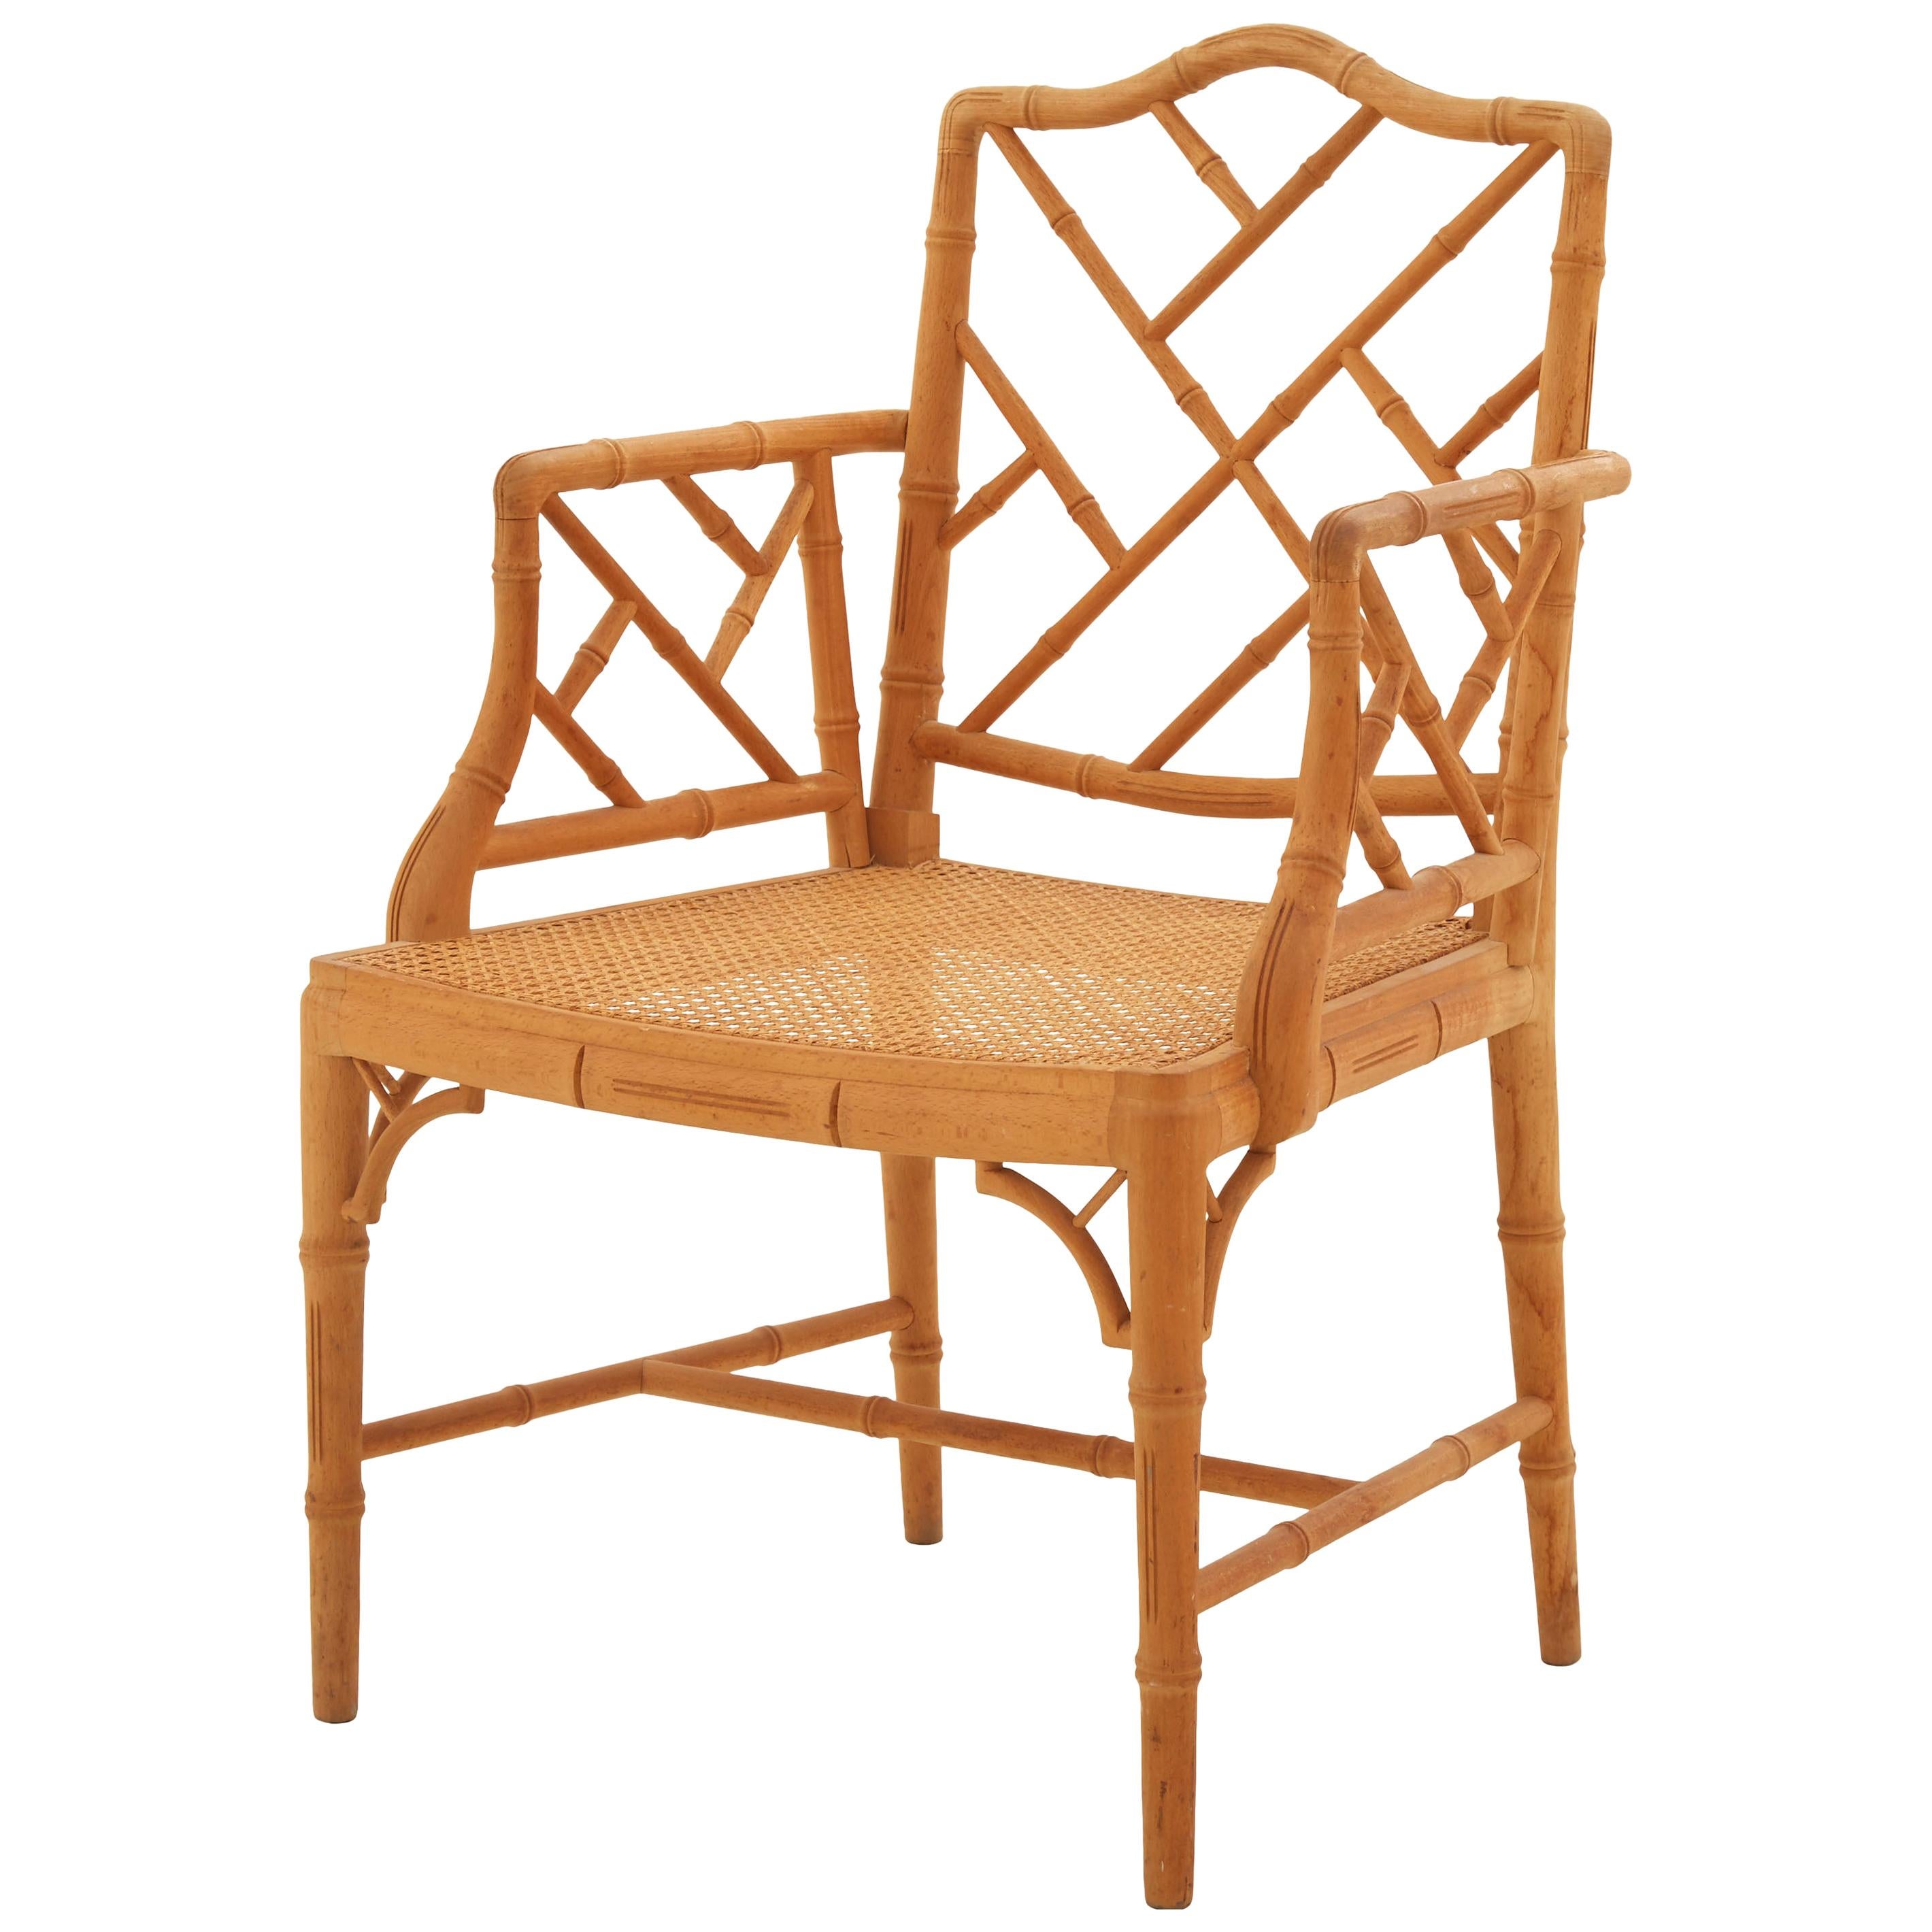 Chinese Chippendale-Style Faux Bamboo Armchair with Cane Seat